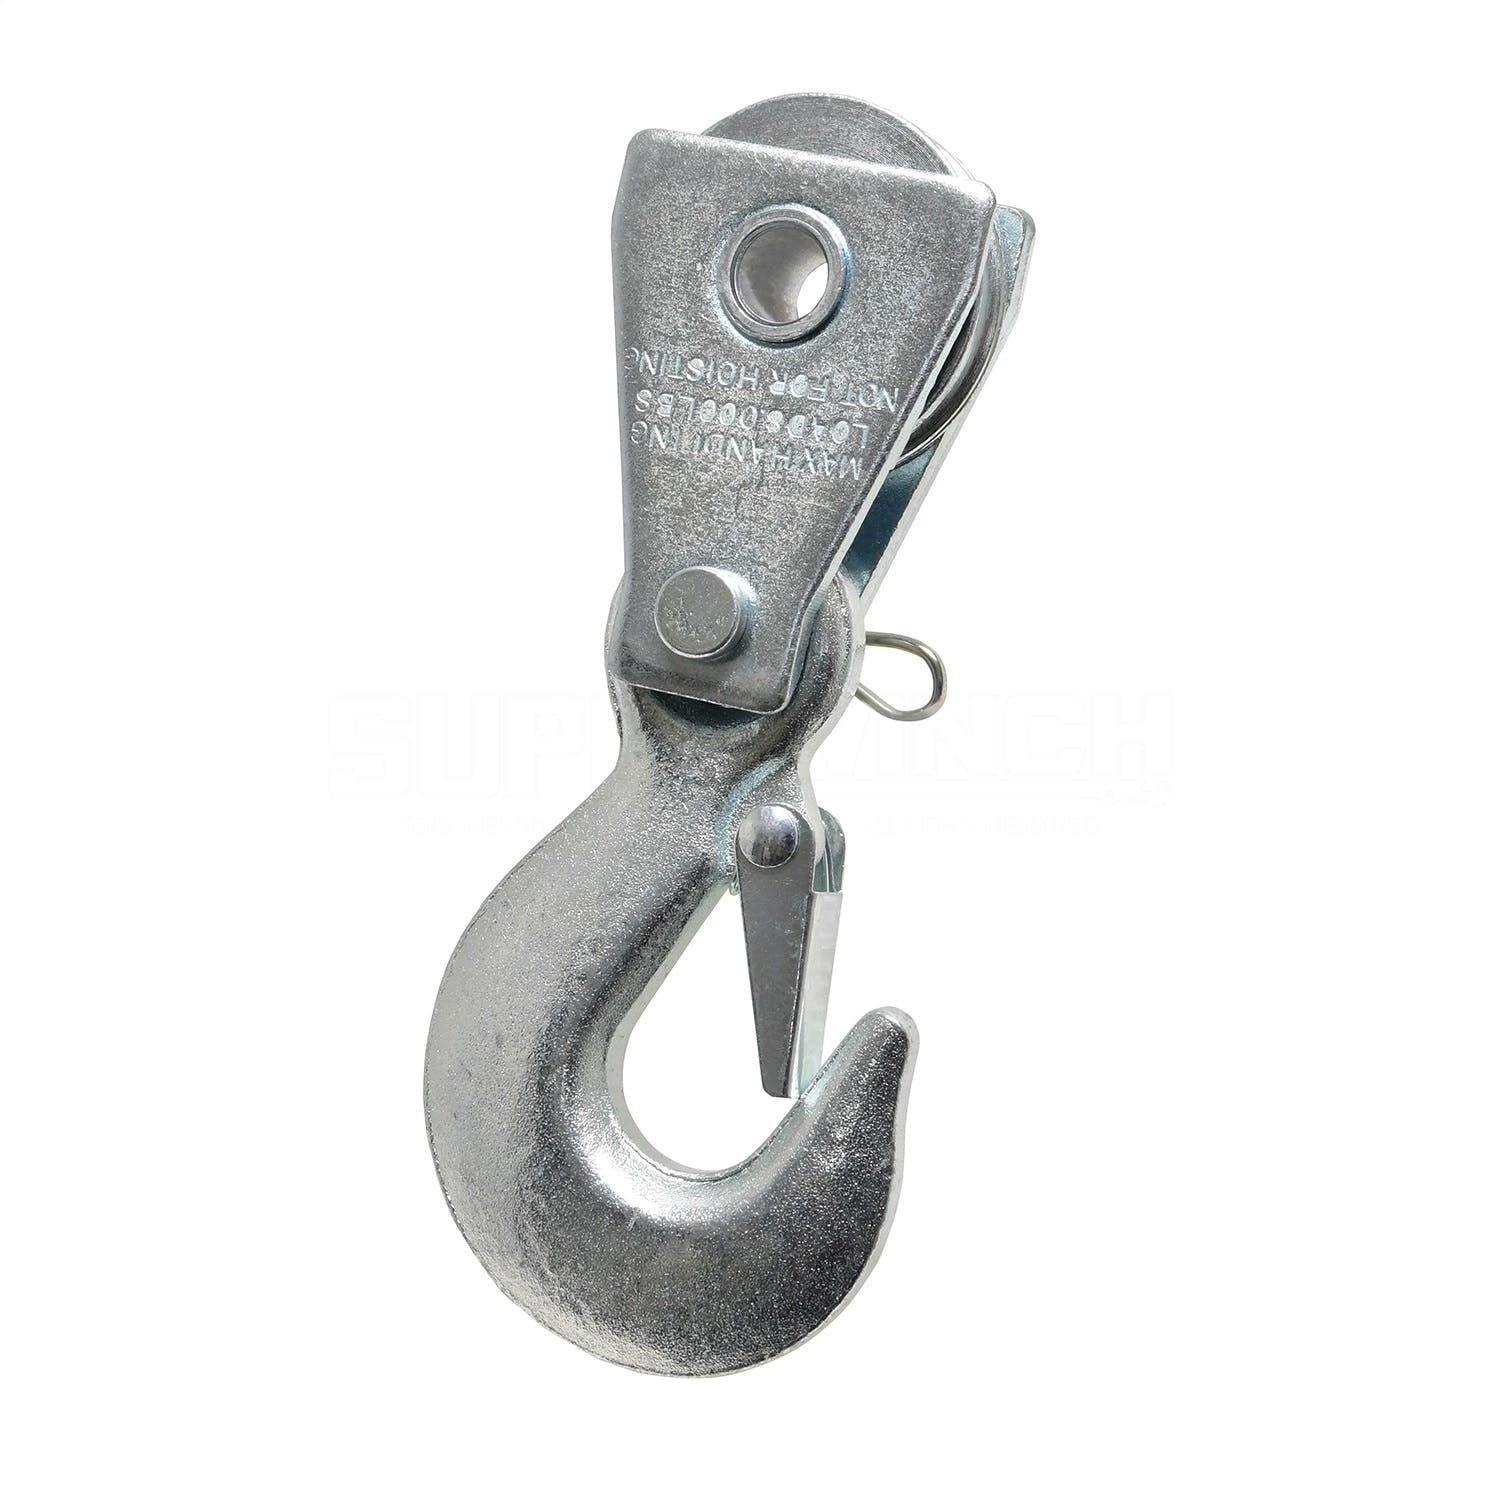 Superwinch 2227A Pulley Block with Hook